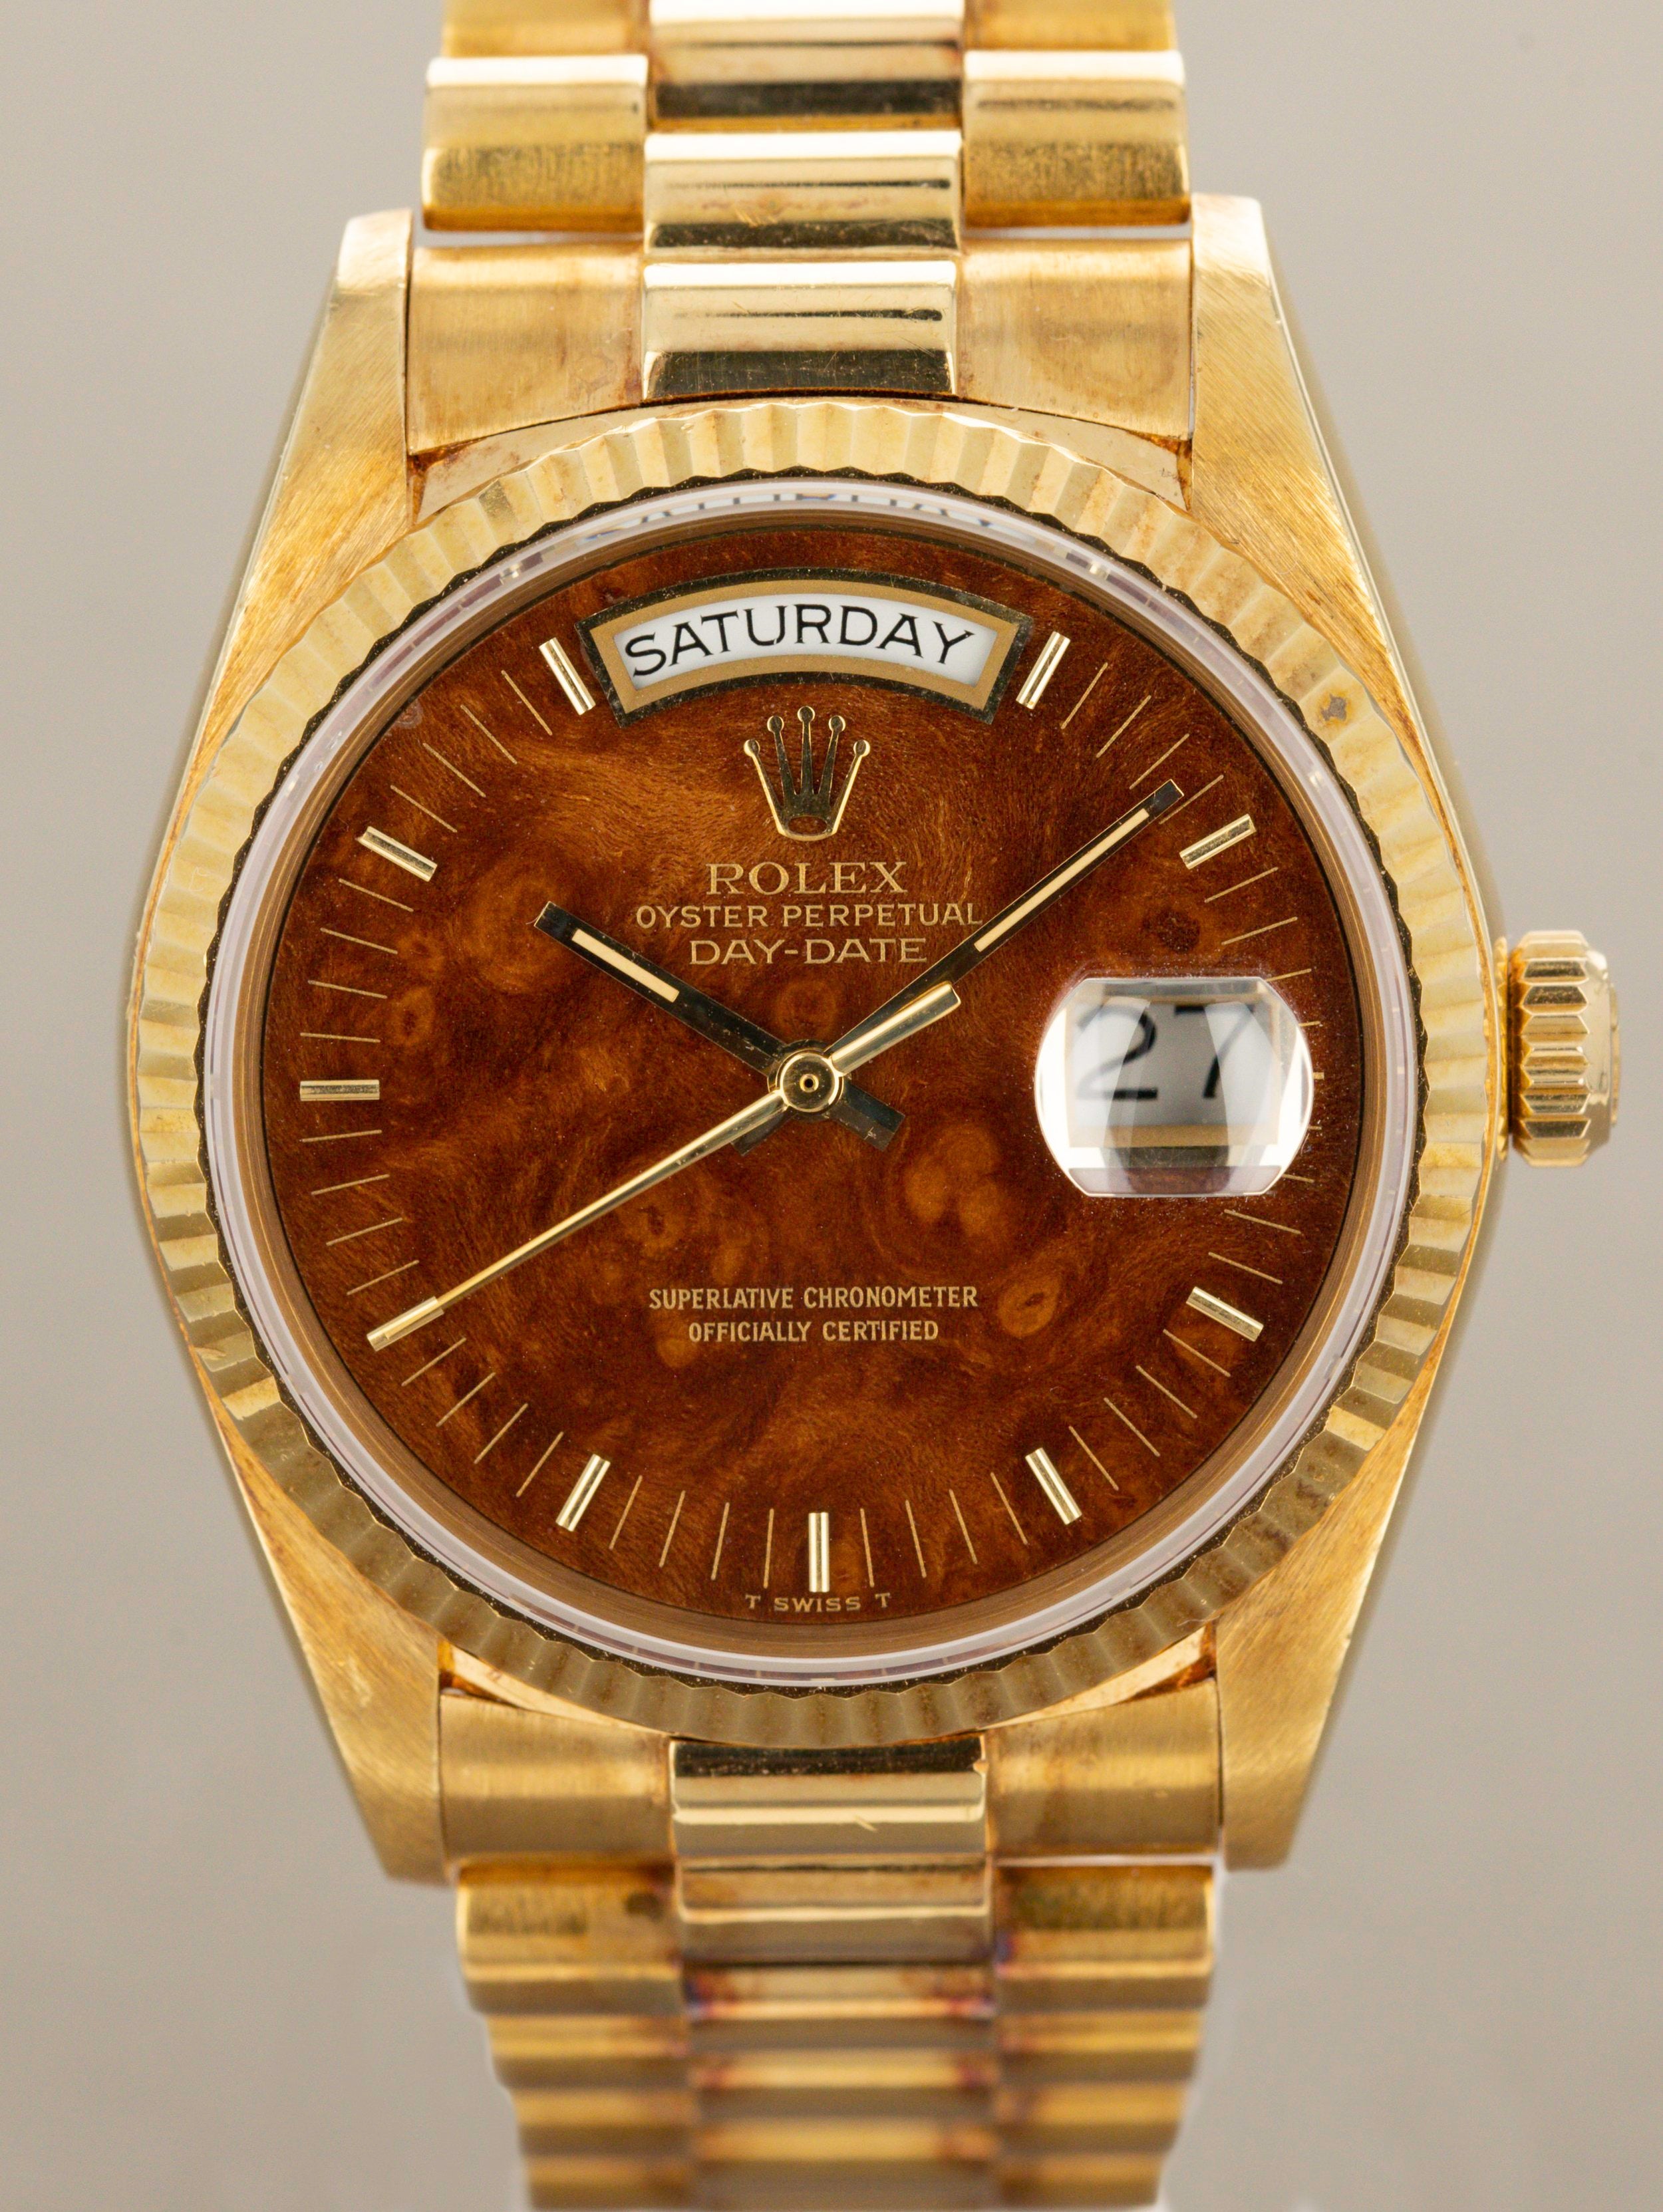 Rolex Day-Date Ref. 18038 - Burlwood Dial with Papers